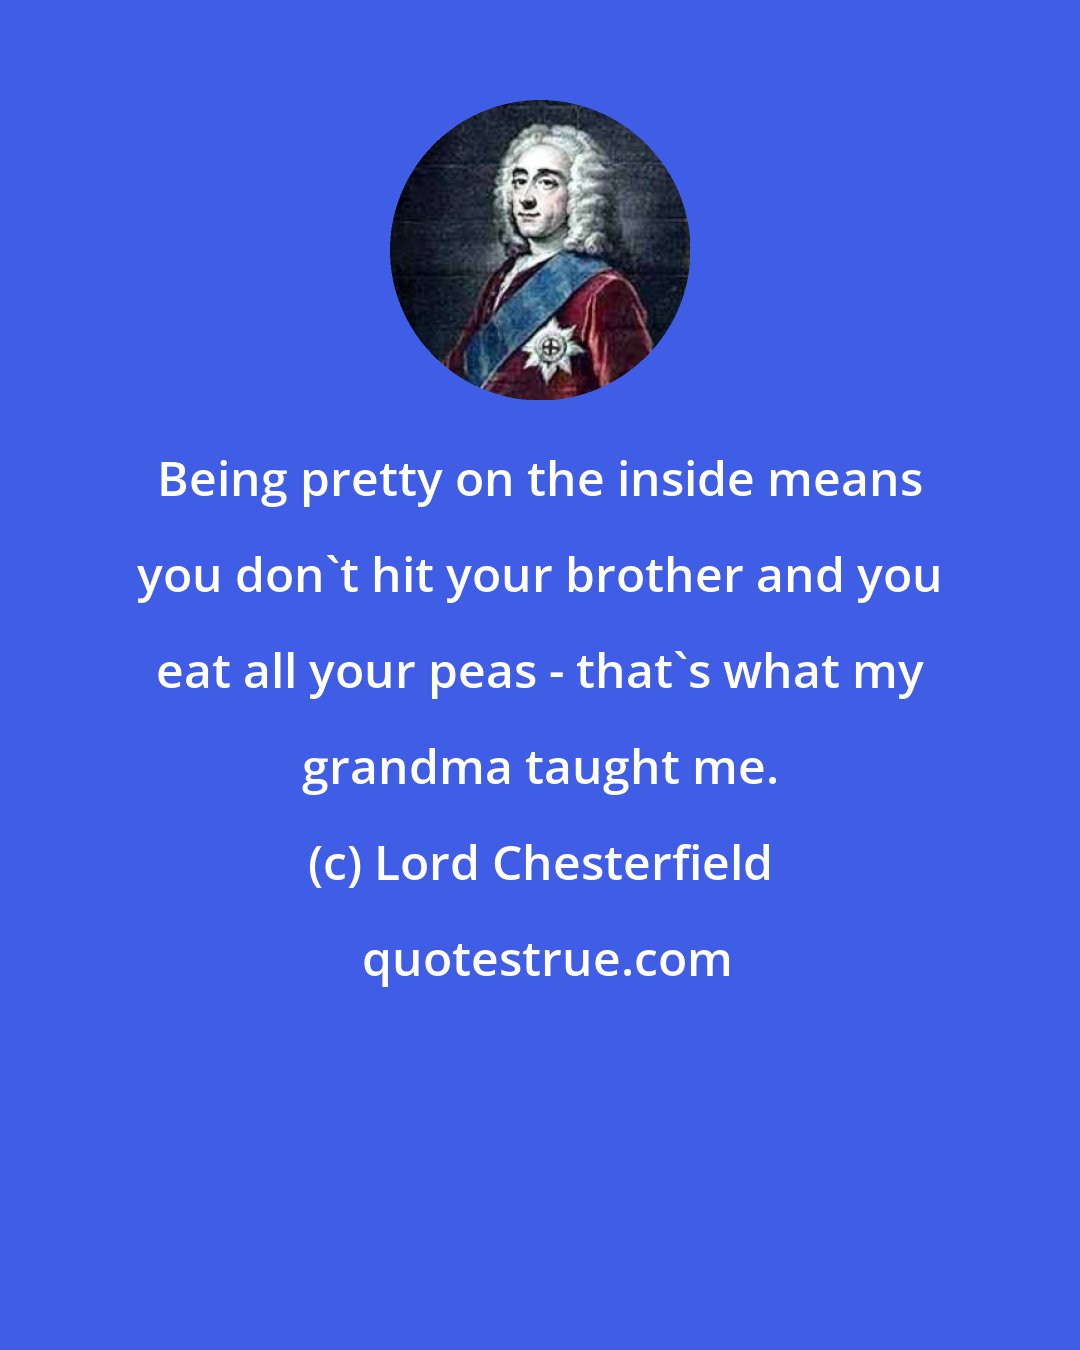 Lord Chesterfield: Being pretty on the inside means you don't hit your brother and you eat all your peas - that's what my grandma taught me.